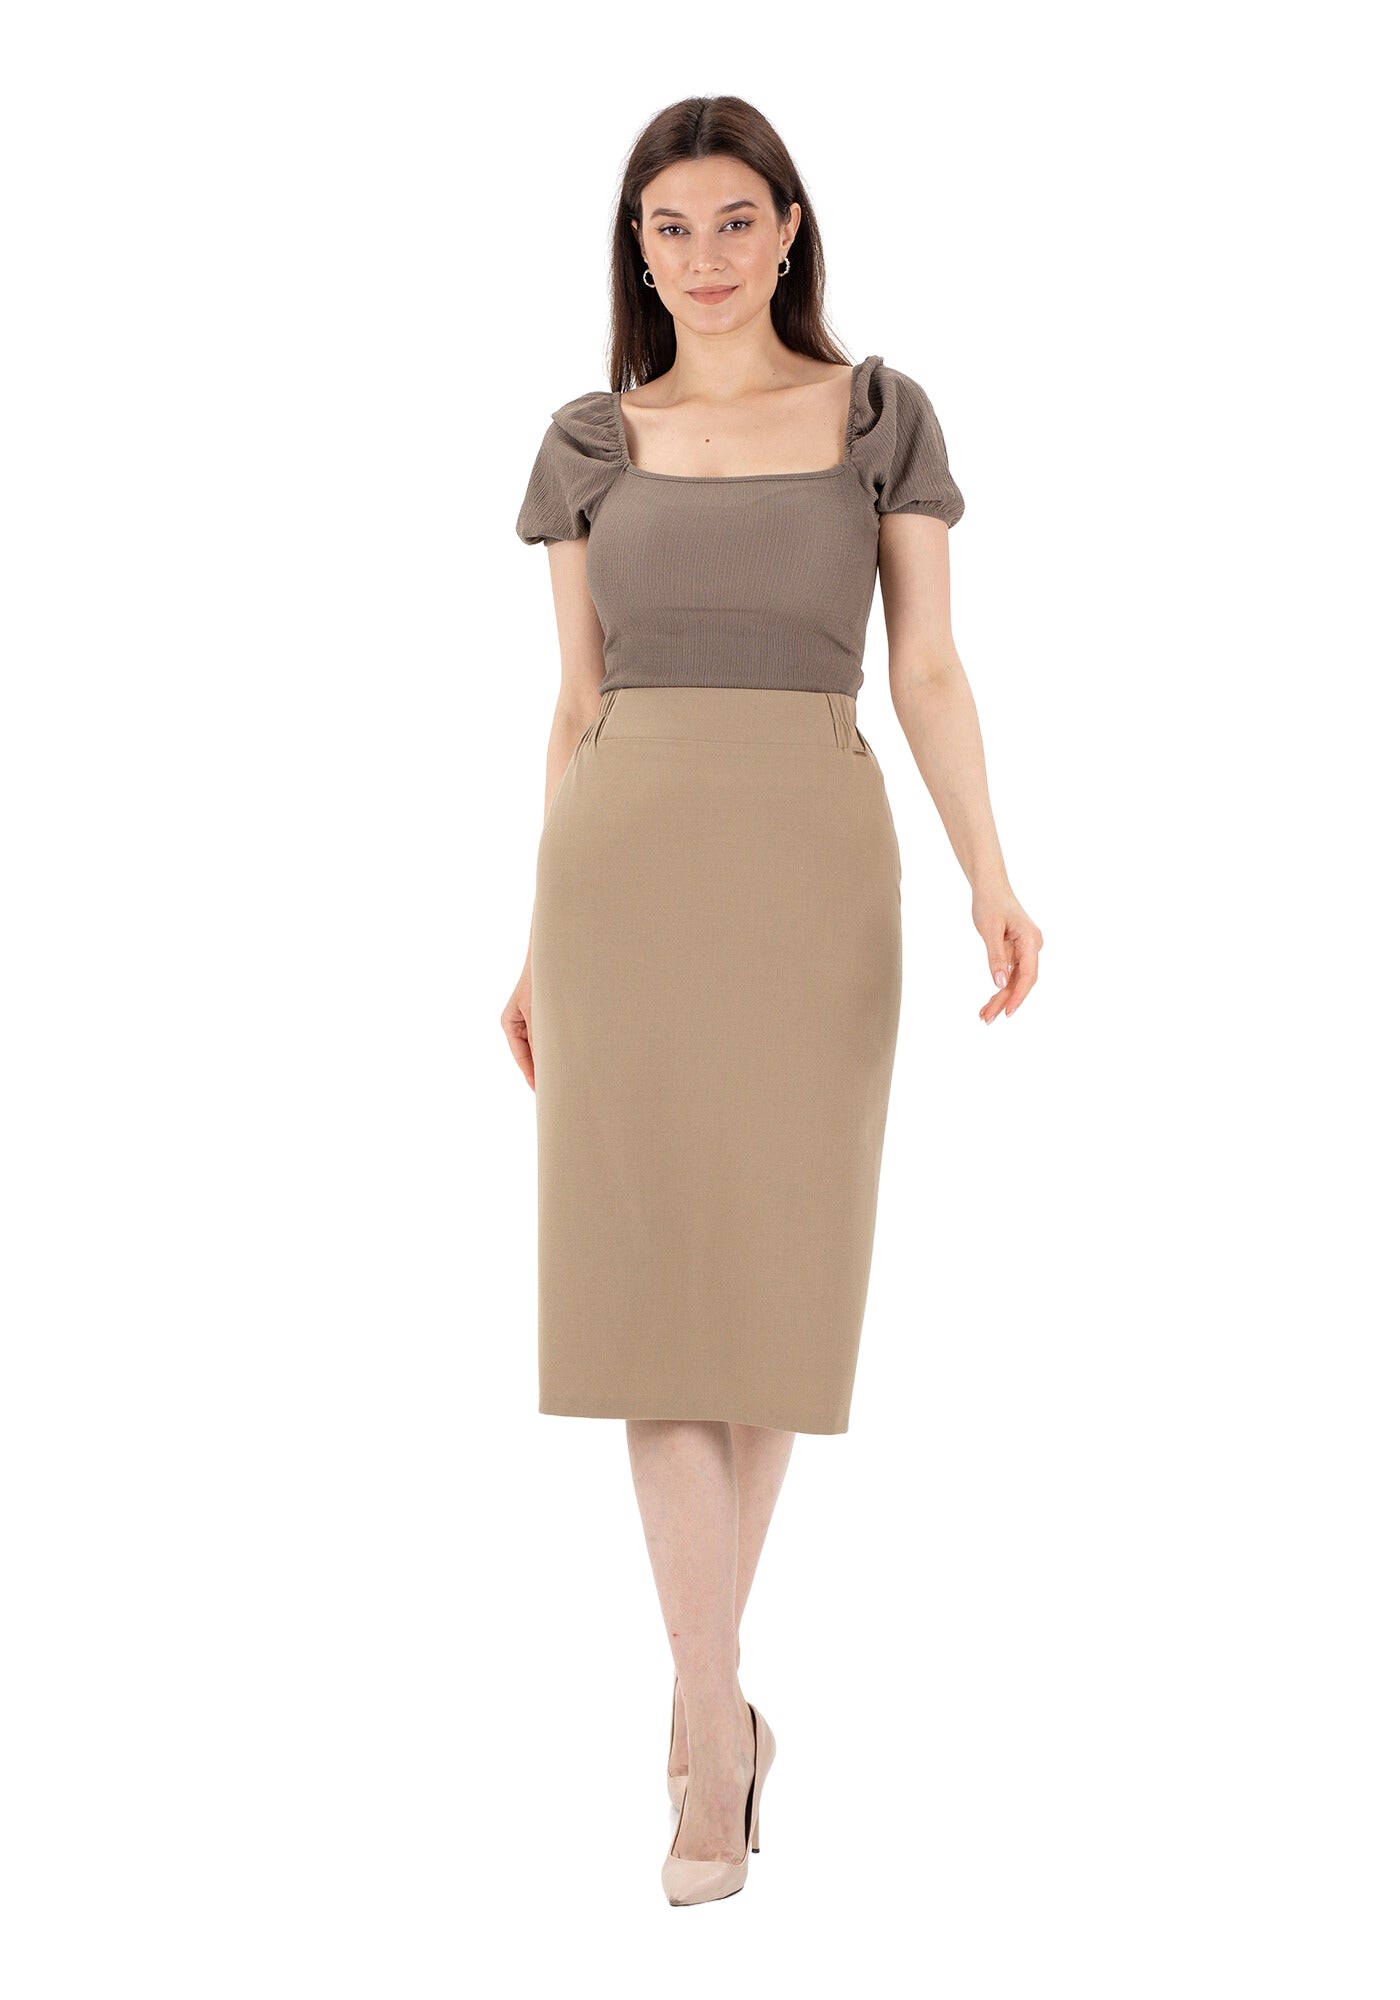 Camel Midi Pencil Skirt with Elastic Waist and Closed Back Vent G-Line